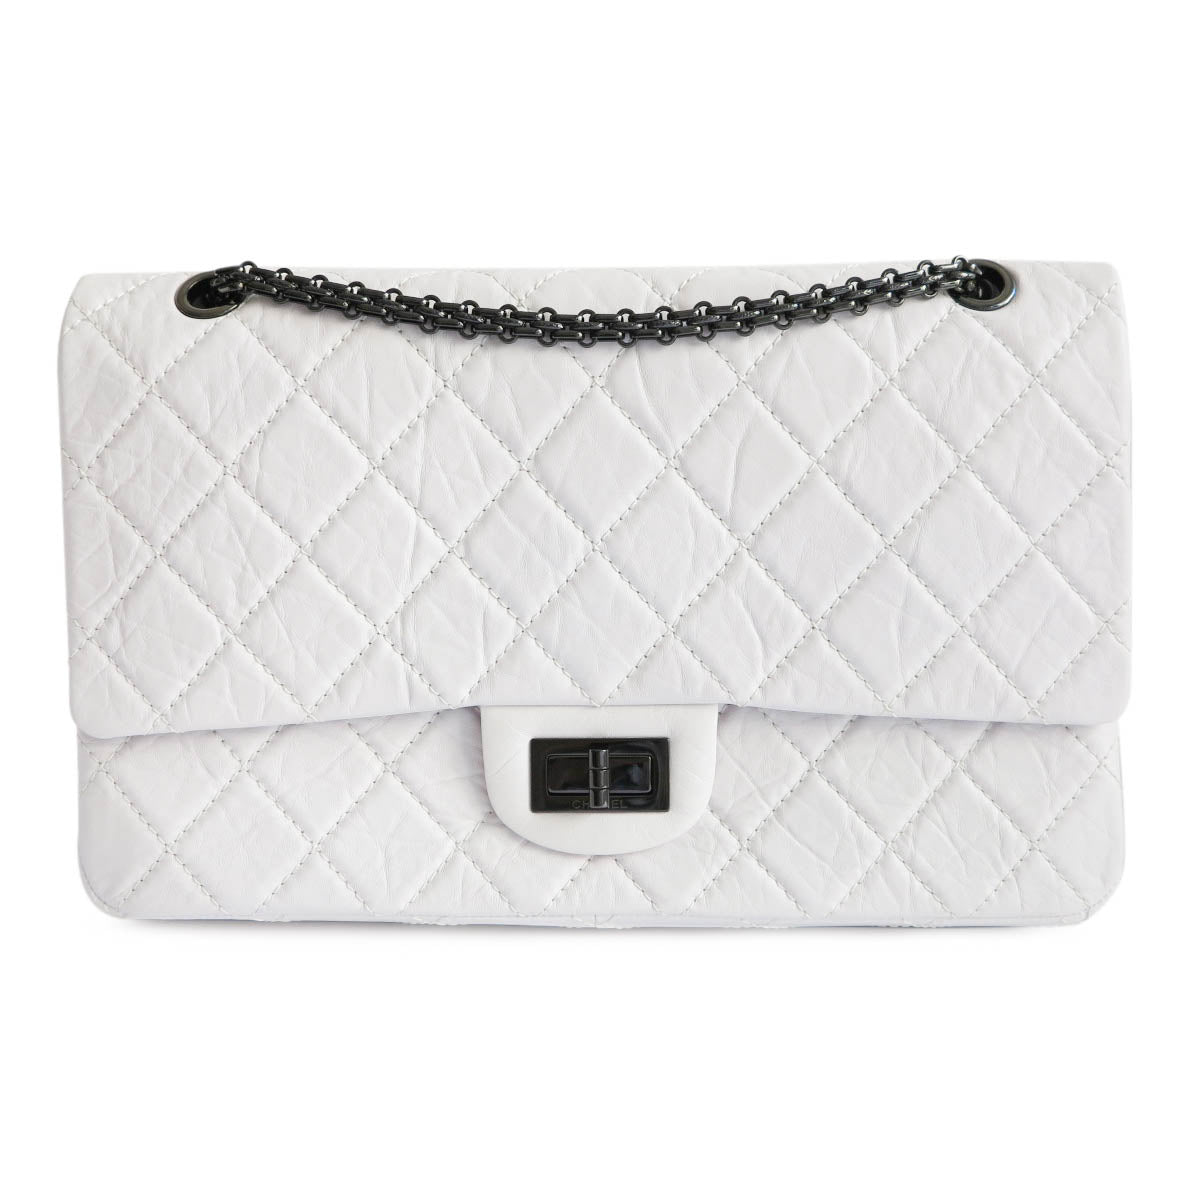 Snag the Latest CHANEL 2.55 Small Bags & Handbags for Women with Fast and  Free Shipping. Authenticity Guaranteed on Designer Handbags $500+ at .